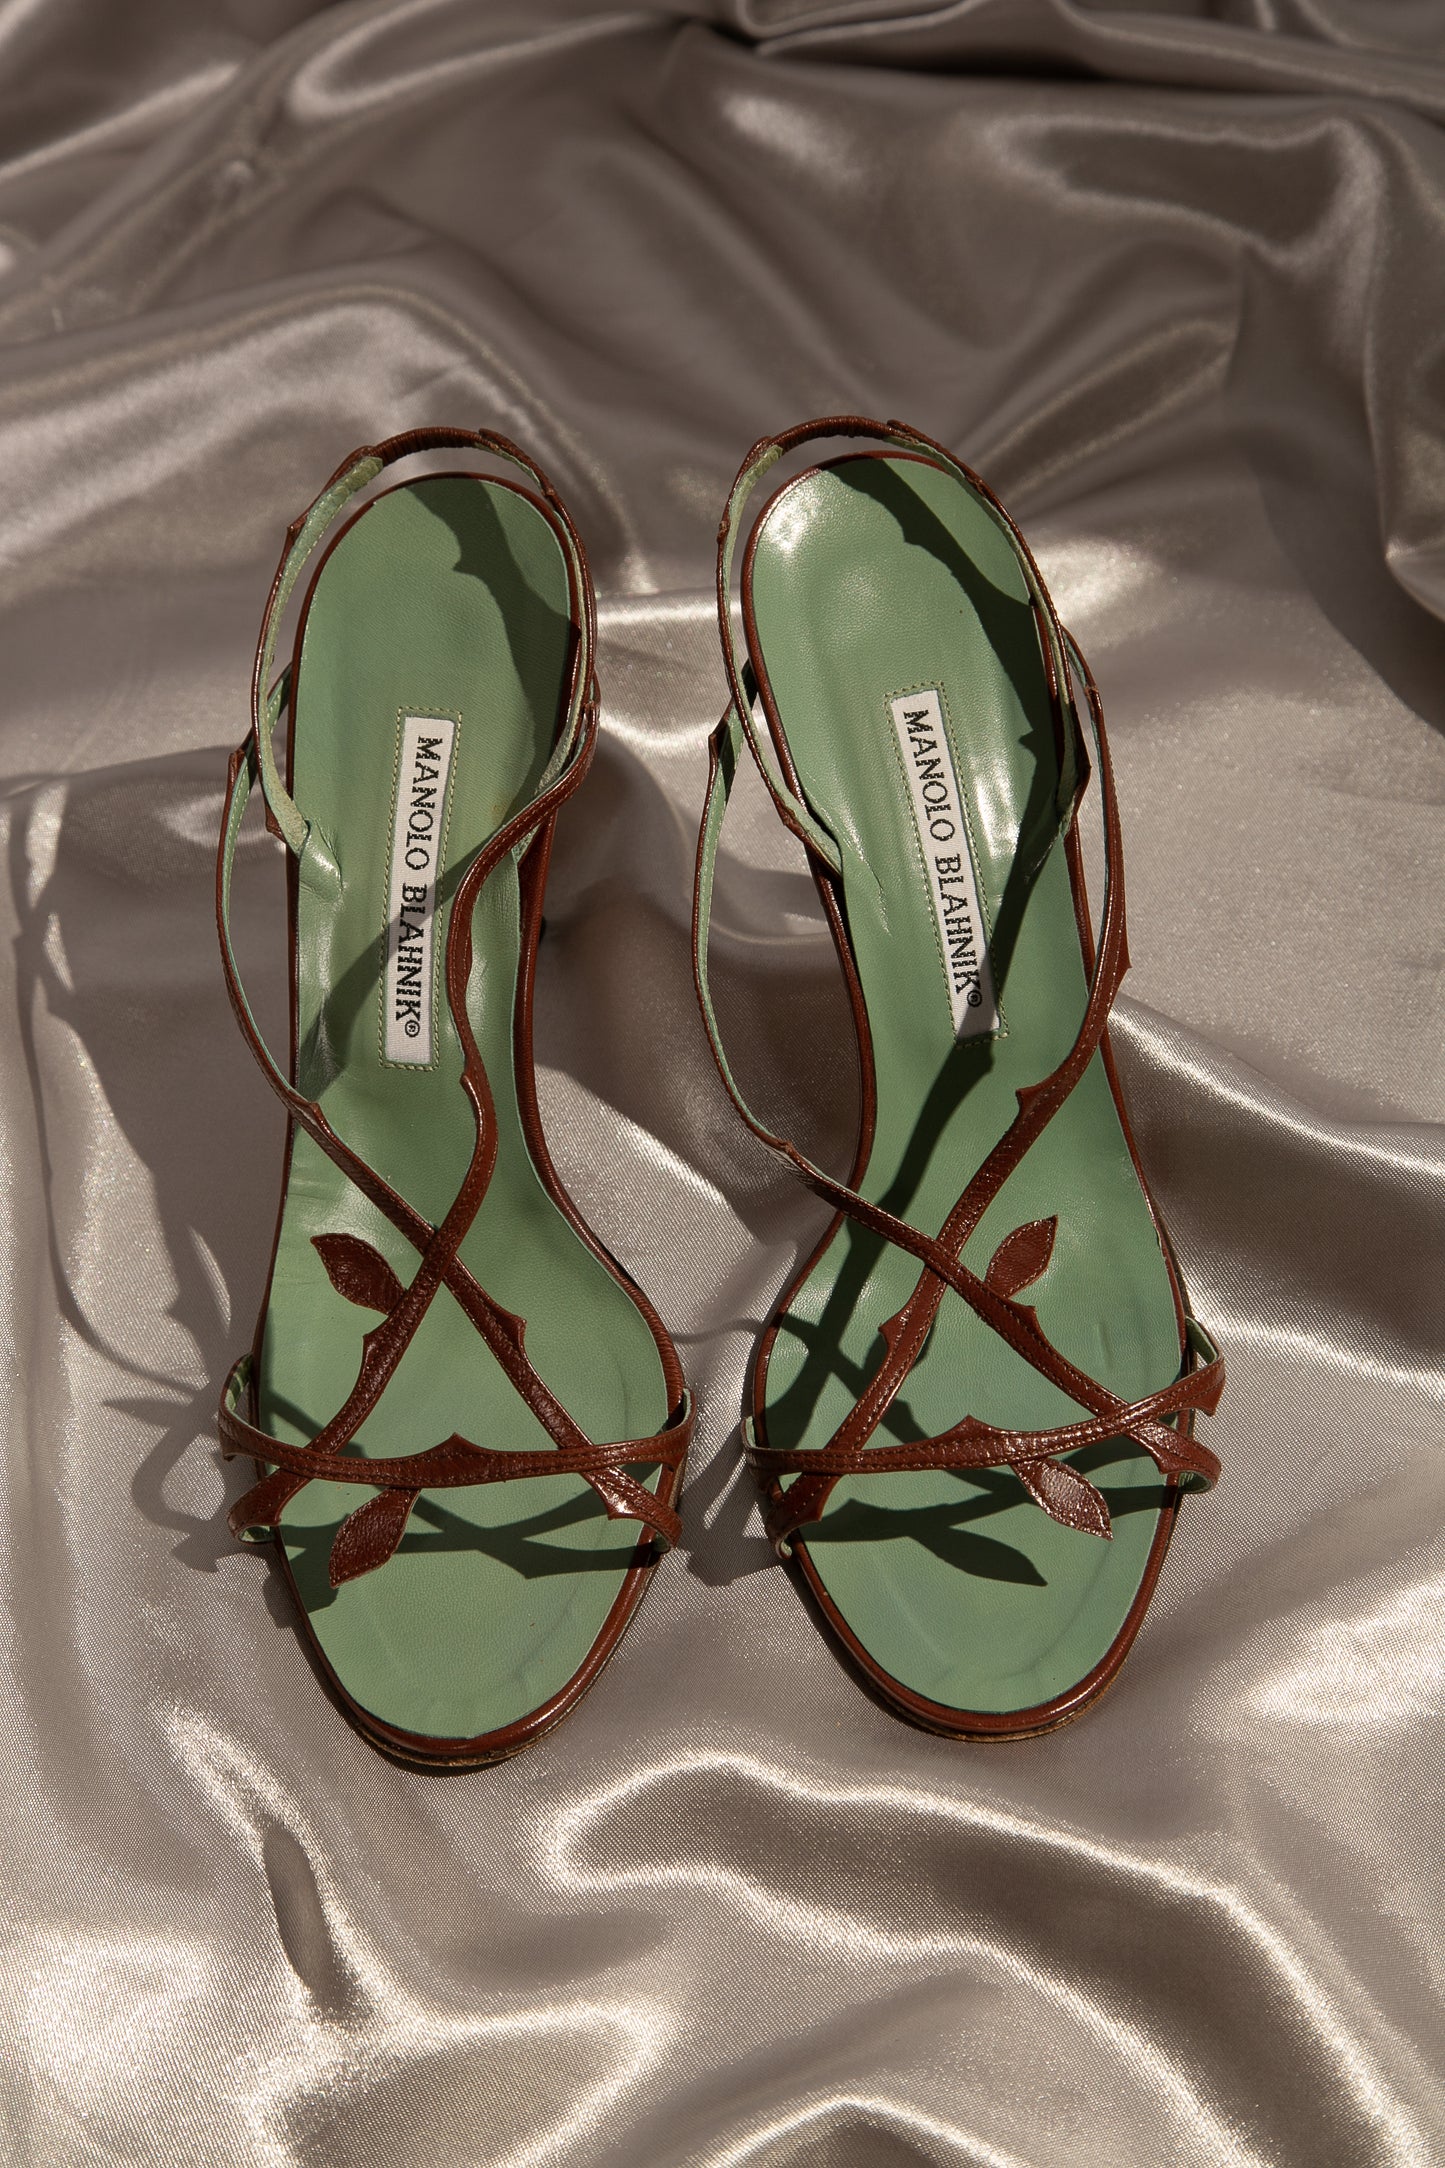 Extremely Rare MANOLO BLAHNIK Sandals